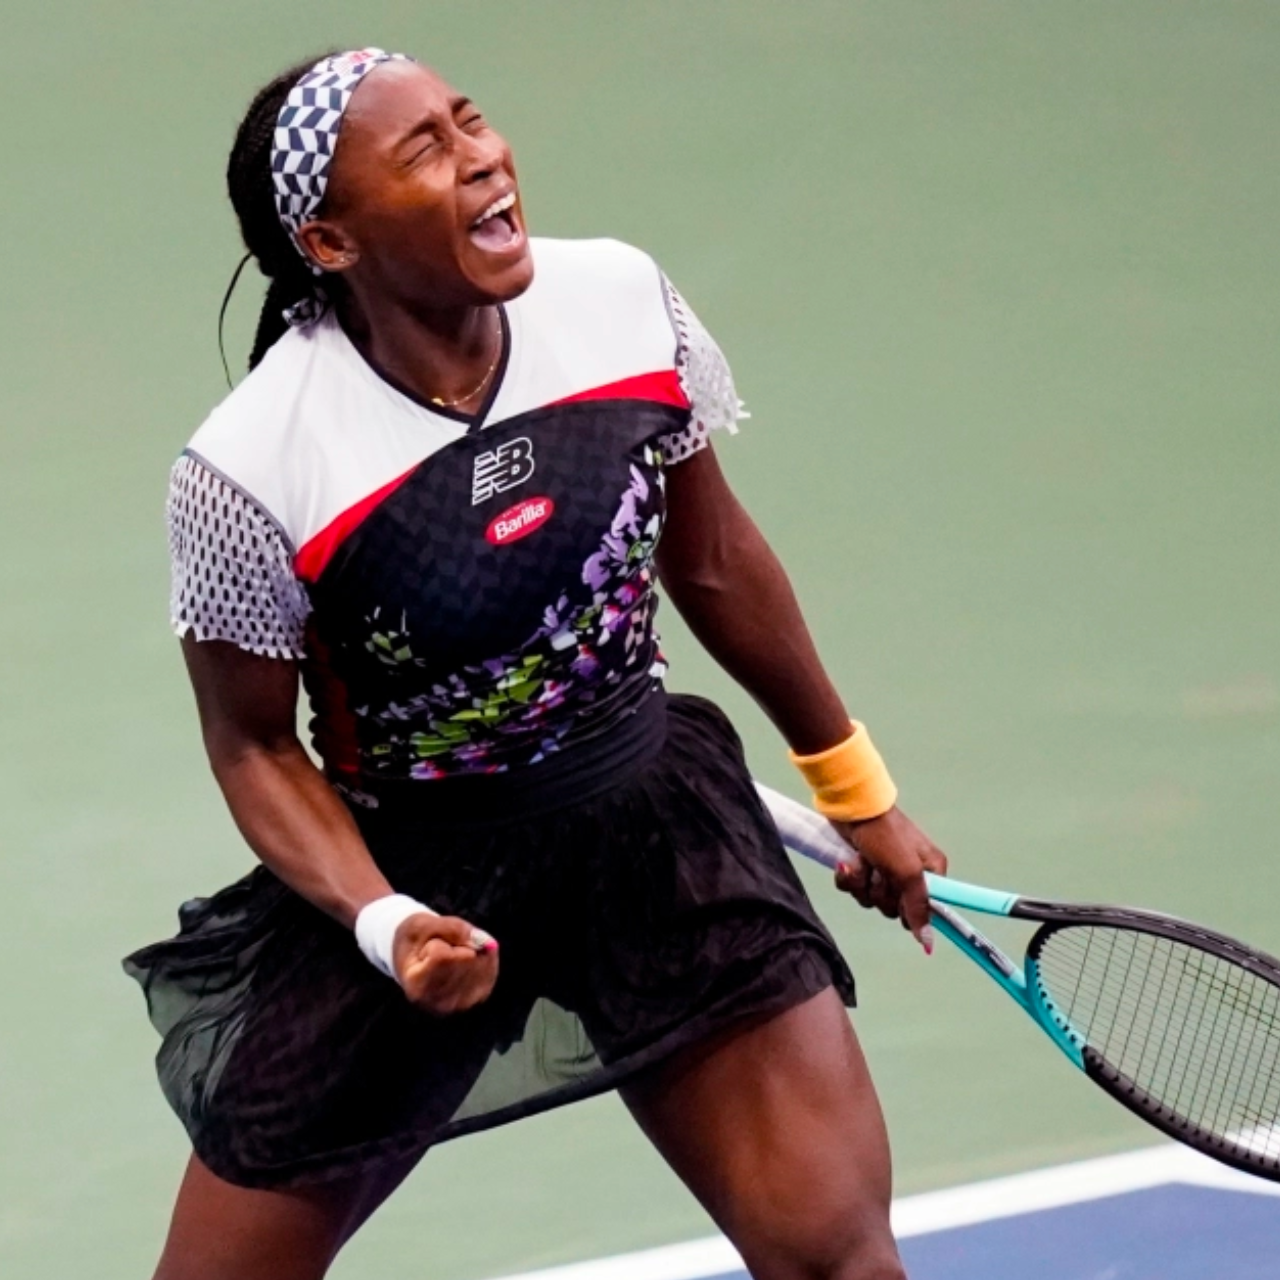 COCO GAUFF, 18, REACHES US OPEN QUARTERFINALS FOR 1ST TIME - The Culture